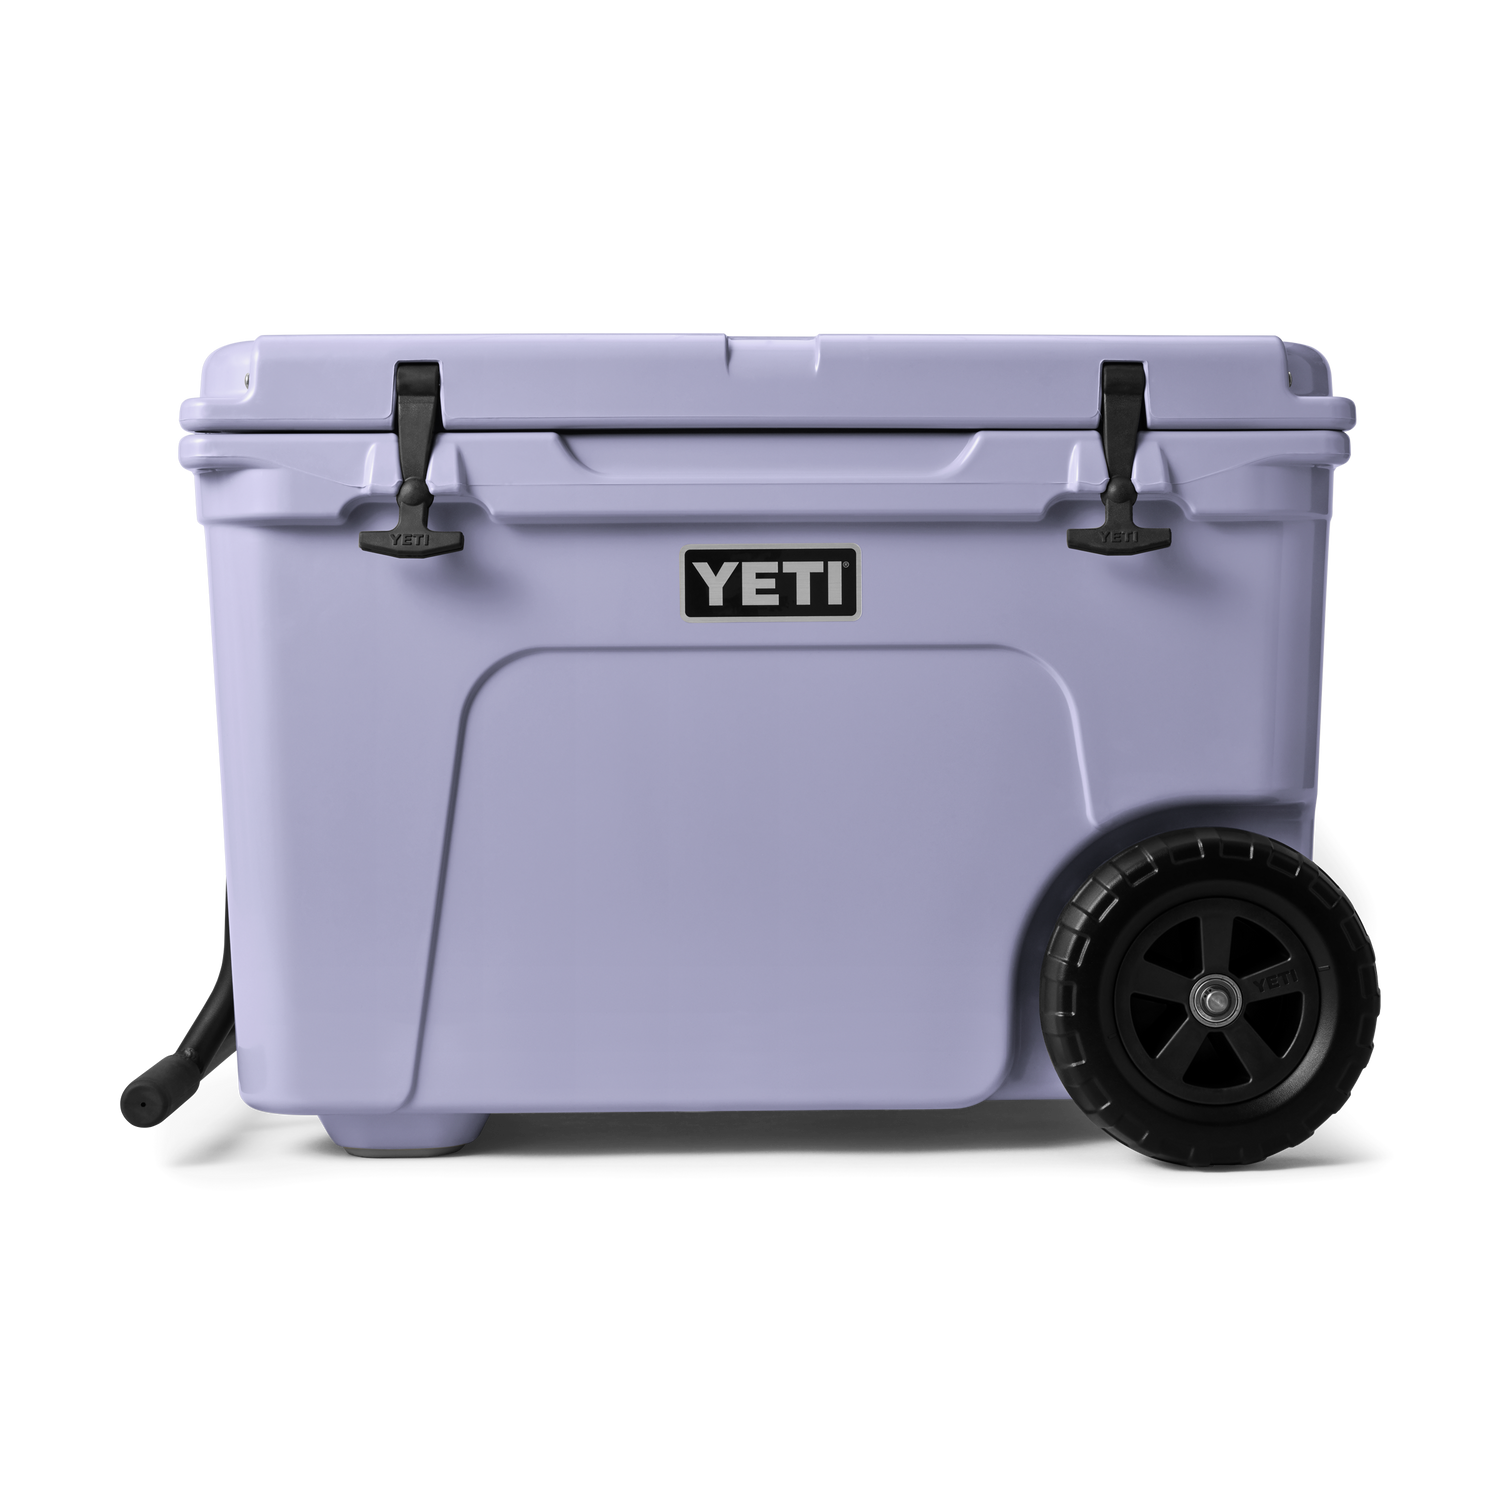 YETI Tundra 65 Cooler RESCUE RED Used In Box- Store Display Nice condition